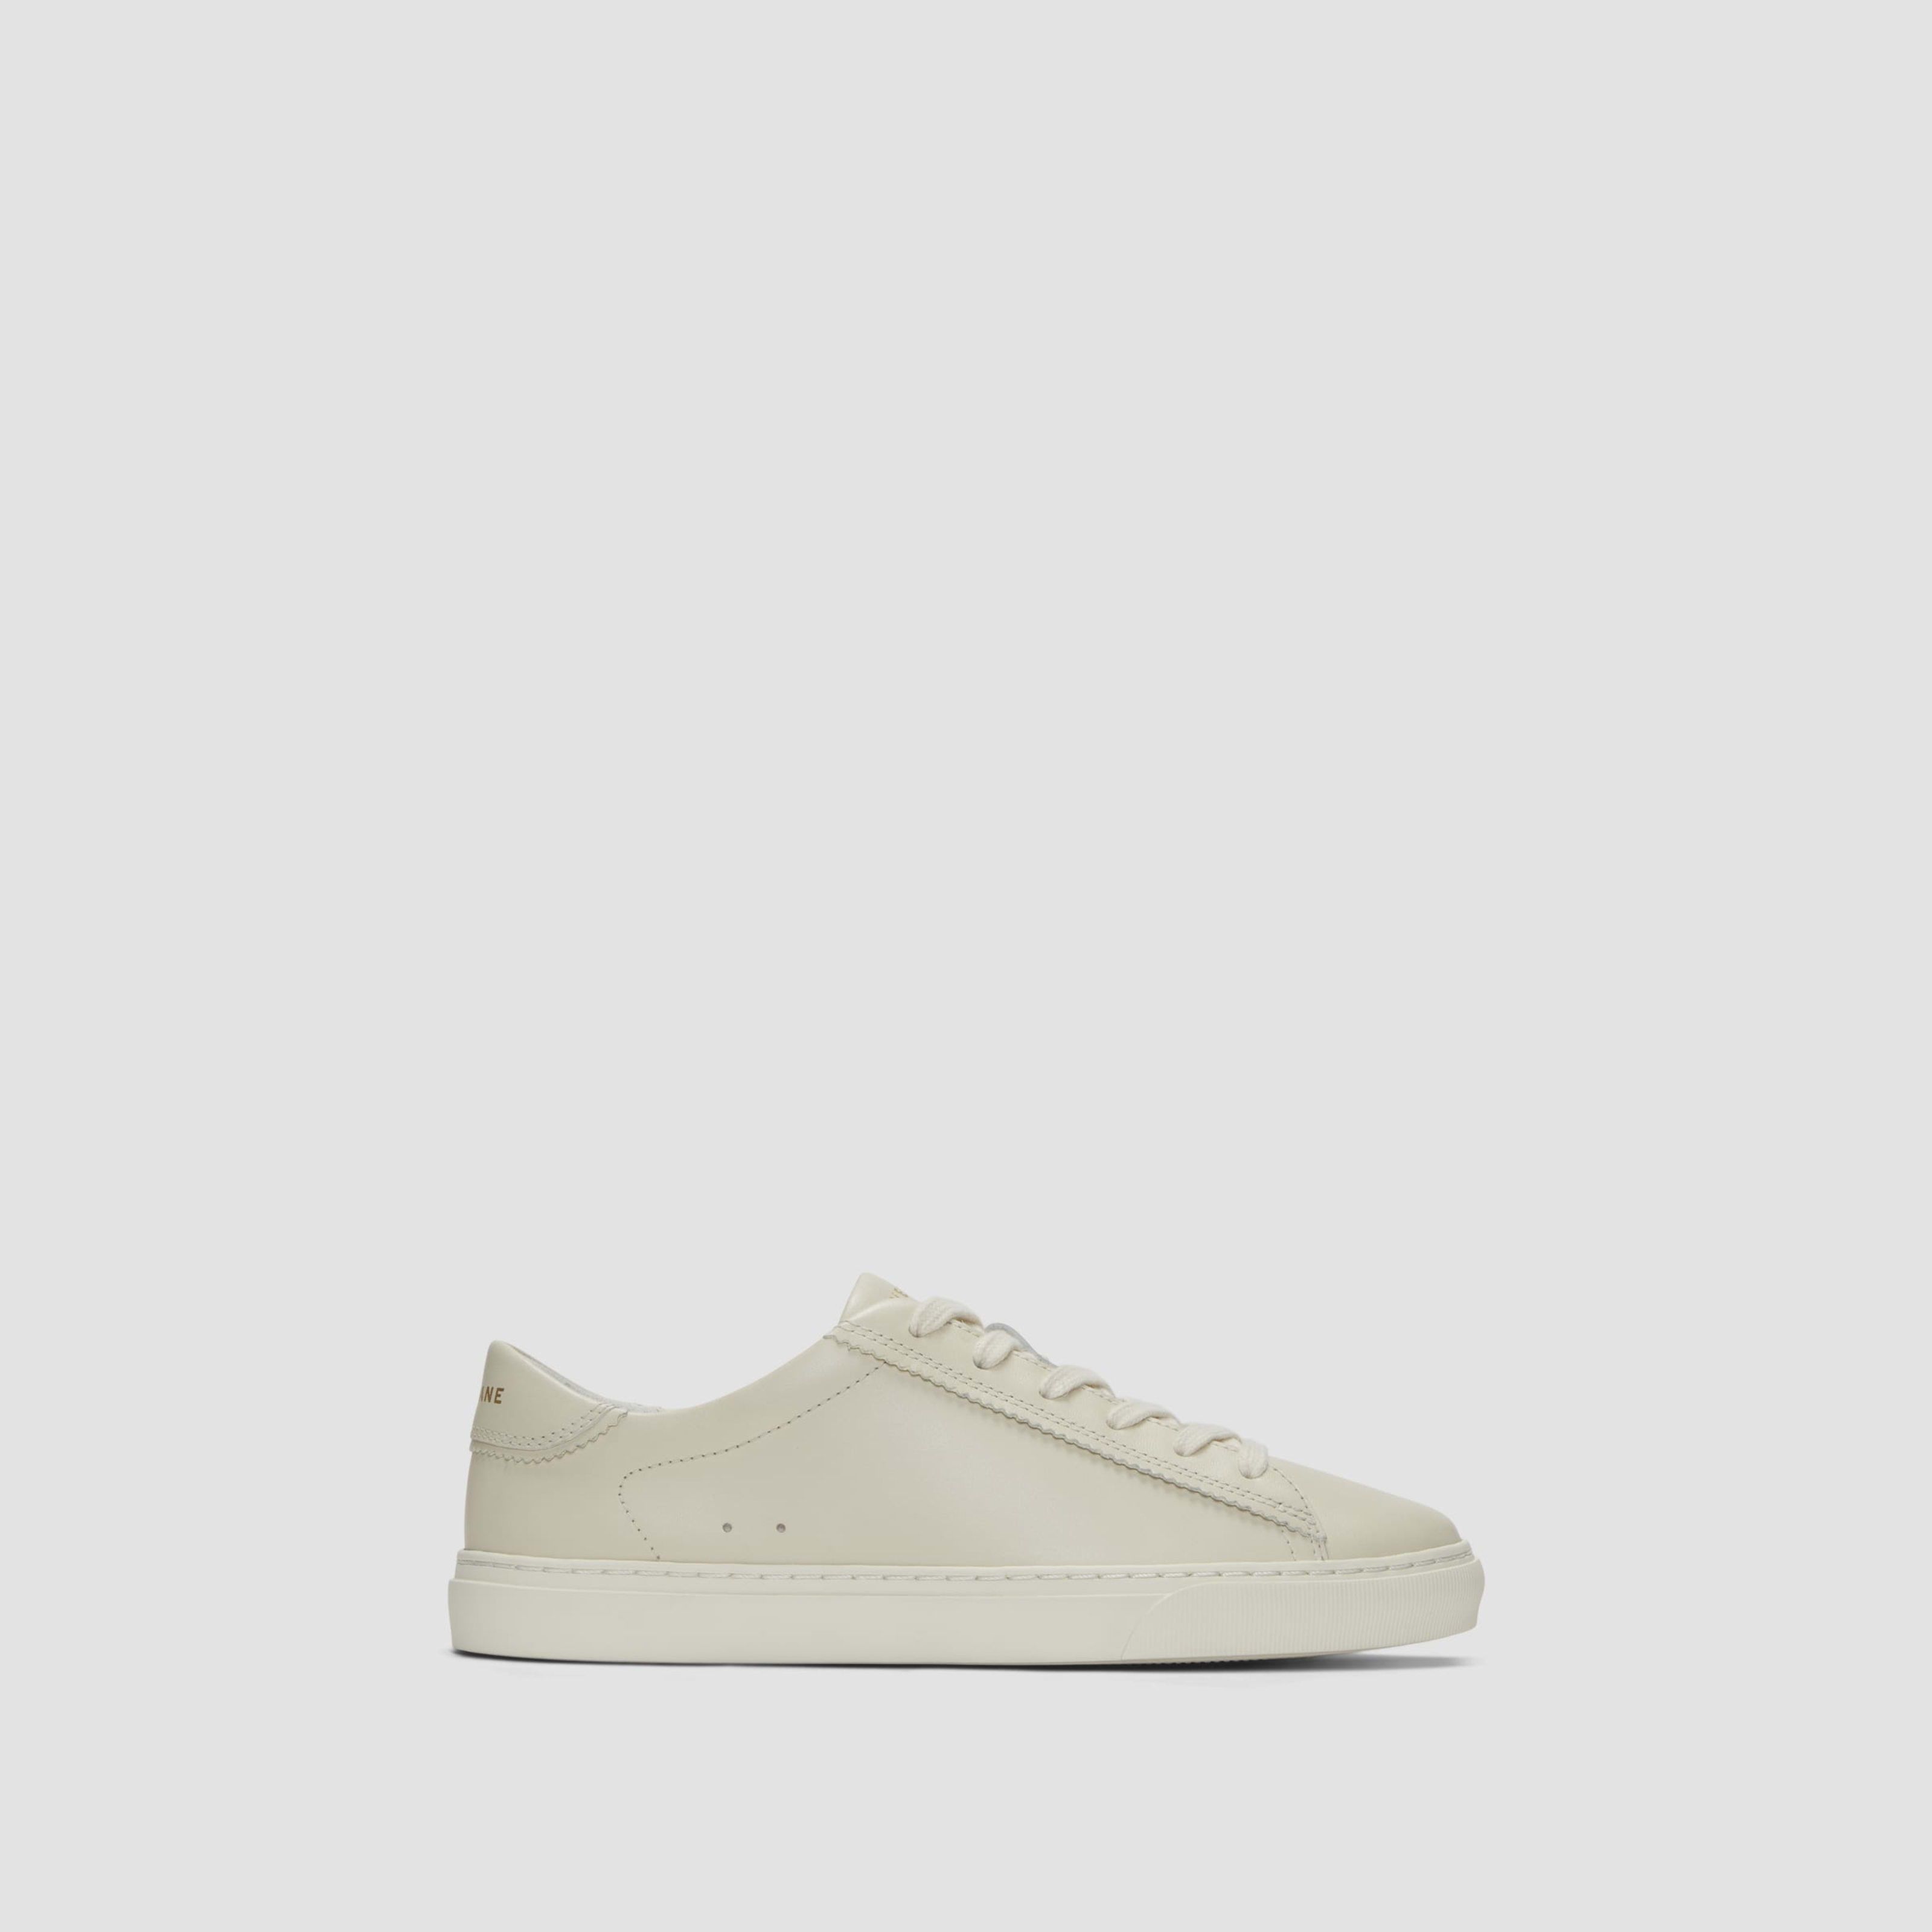 Women's Day Sneaker by Everlane in Parchment, Size 8.5 | Everlane